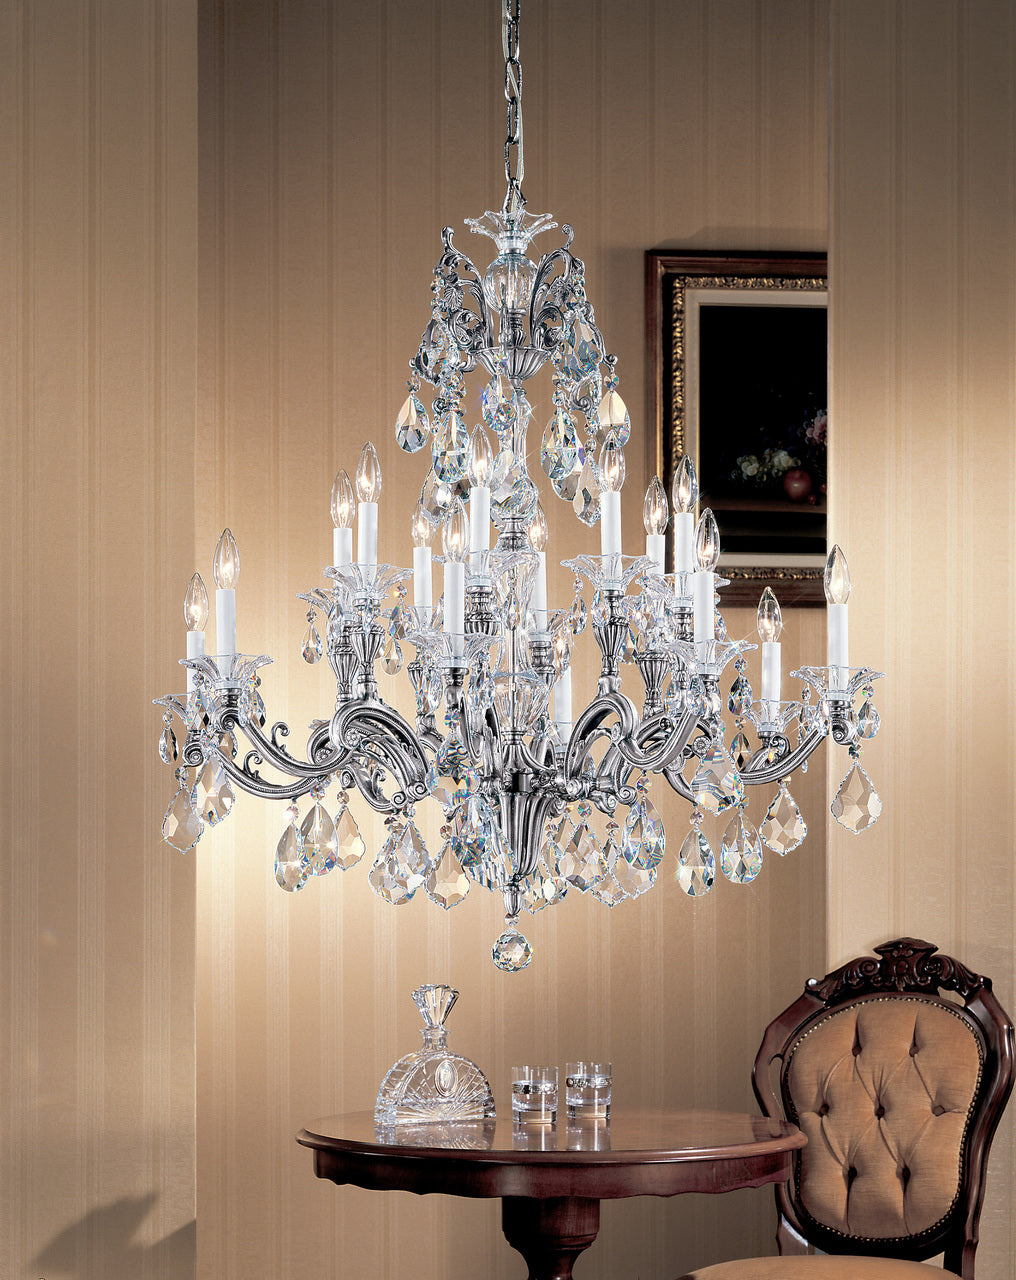 Classic Lighting 57116 RB C Via Firenze Crystal Chandelier in Roman Bronze (Imported from Spain)